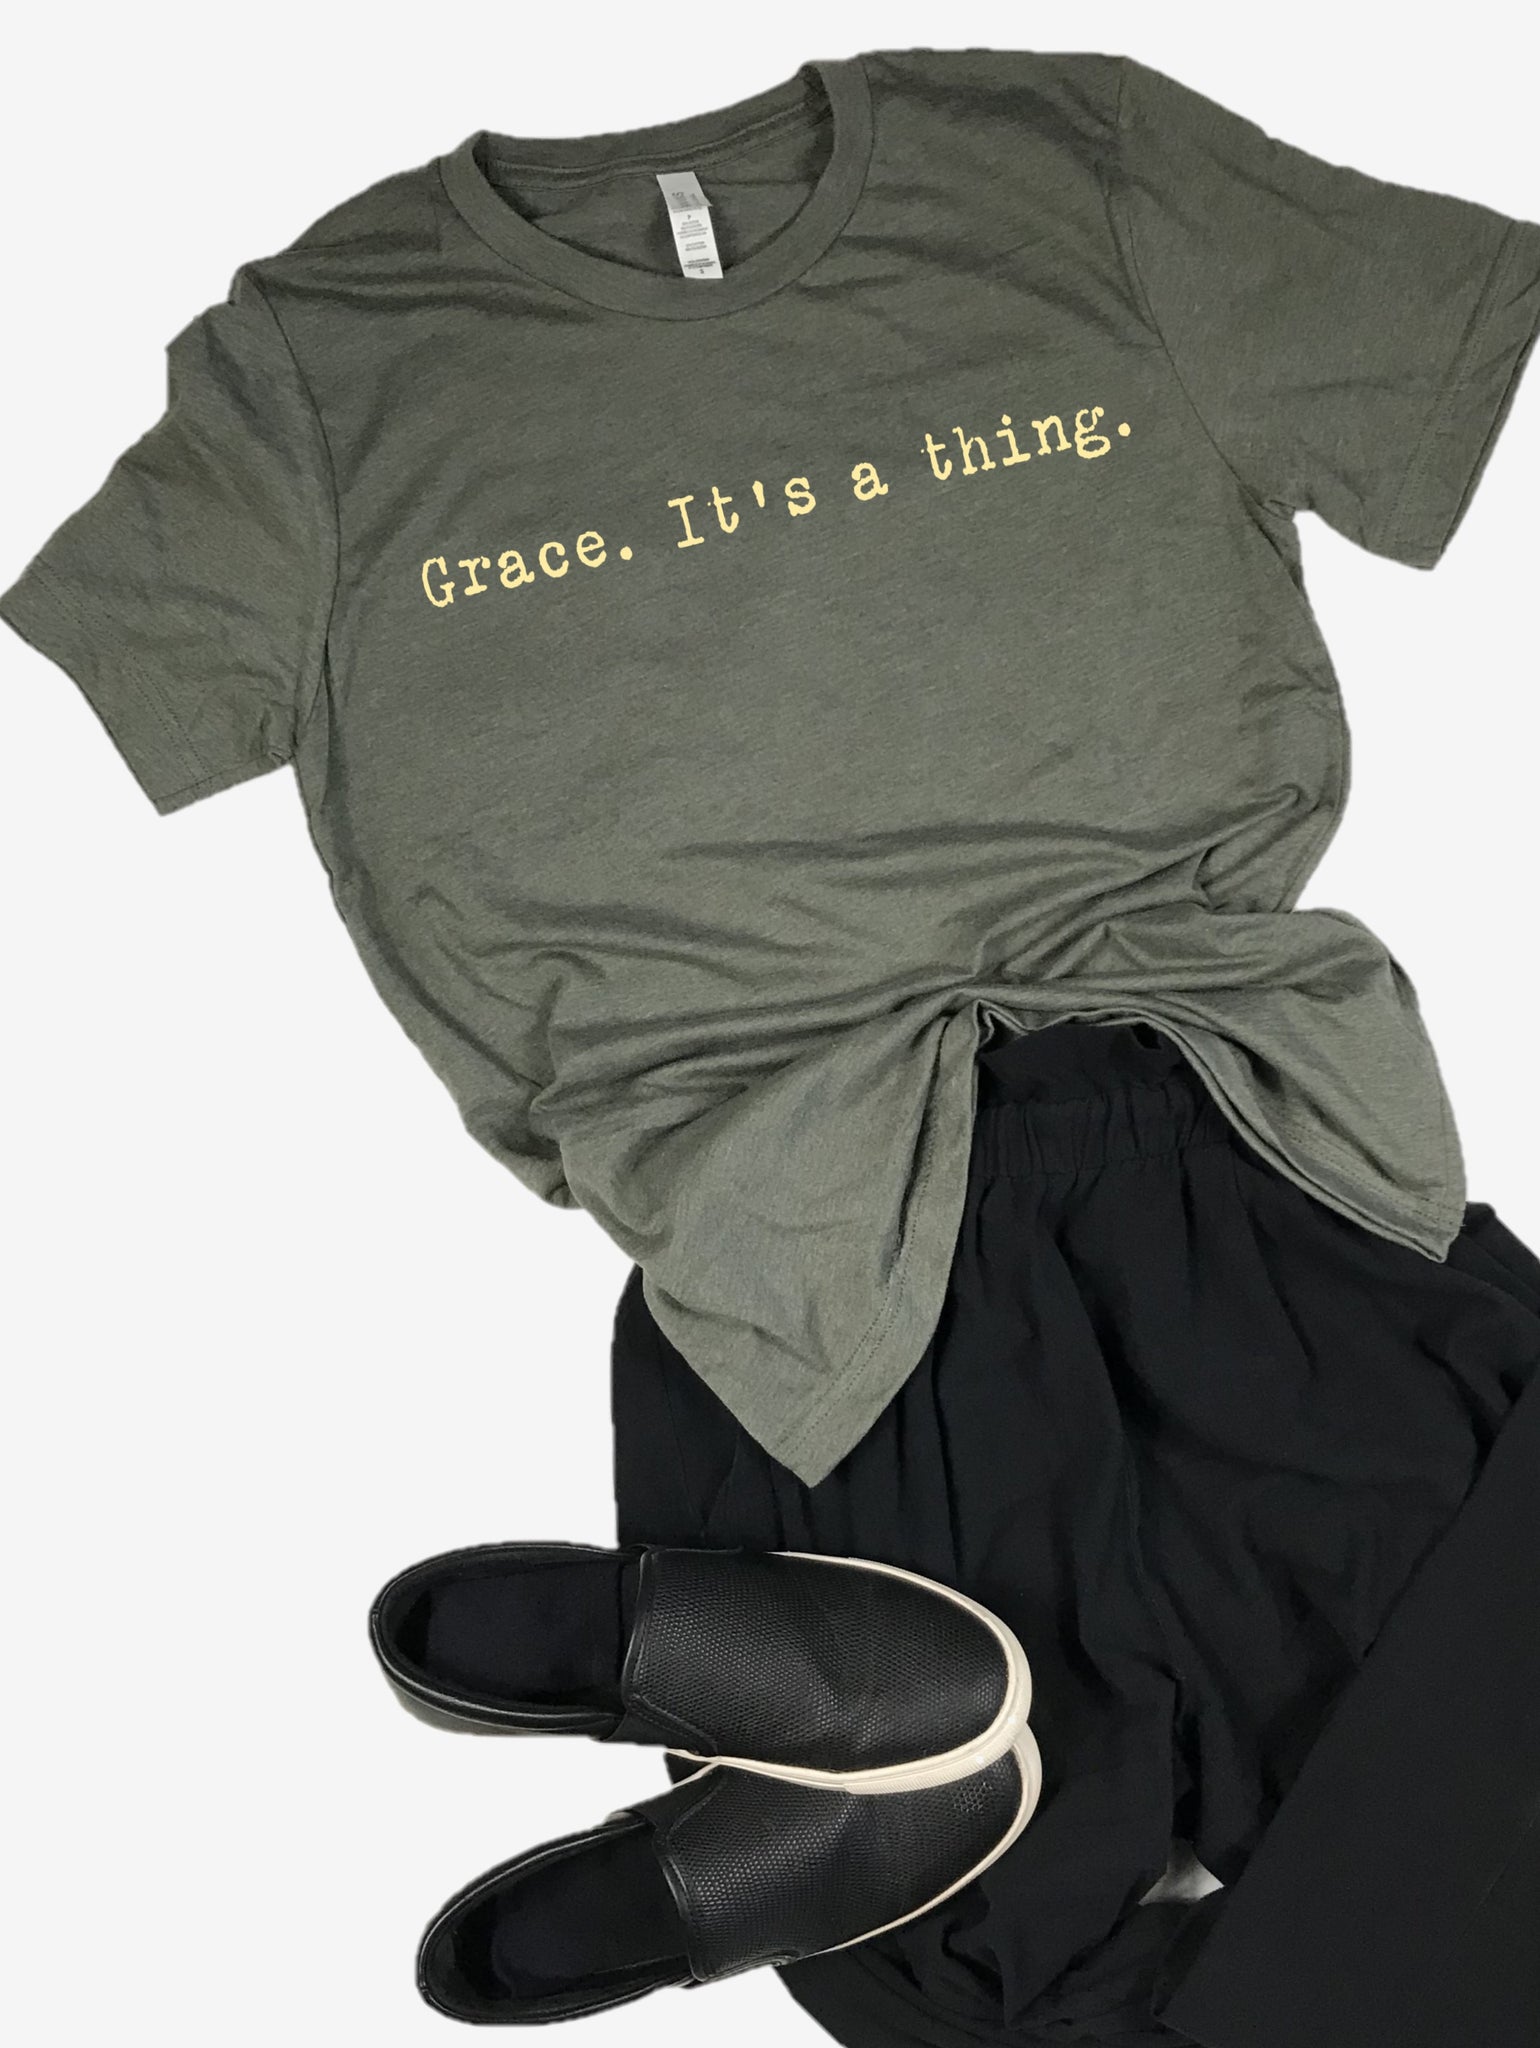 "Grace. It's a thing." Short Sleeve Tee Shirt, Crew Neck, Heather Military Green